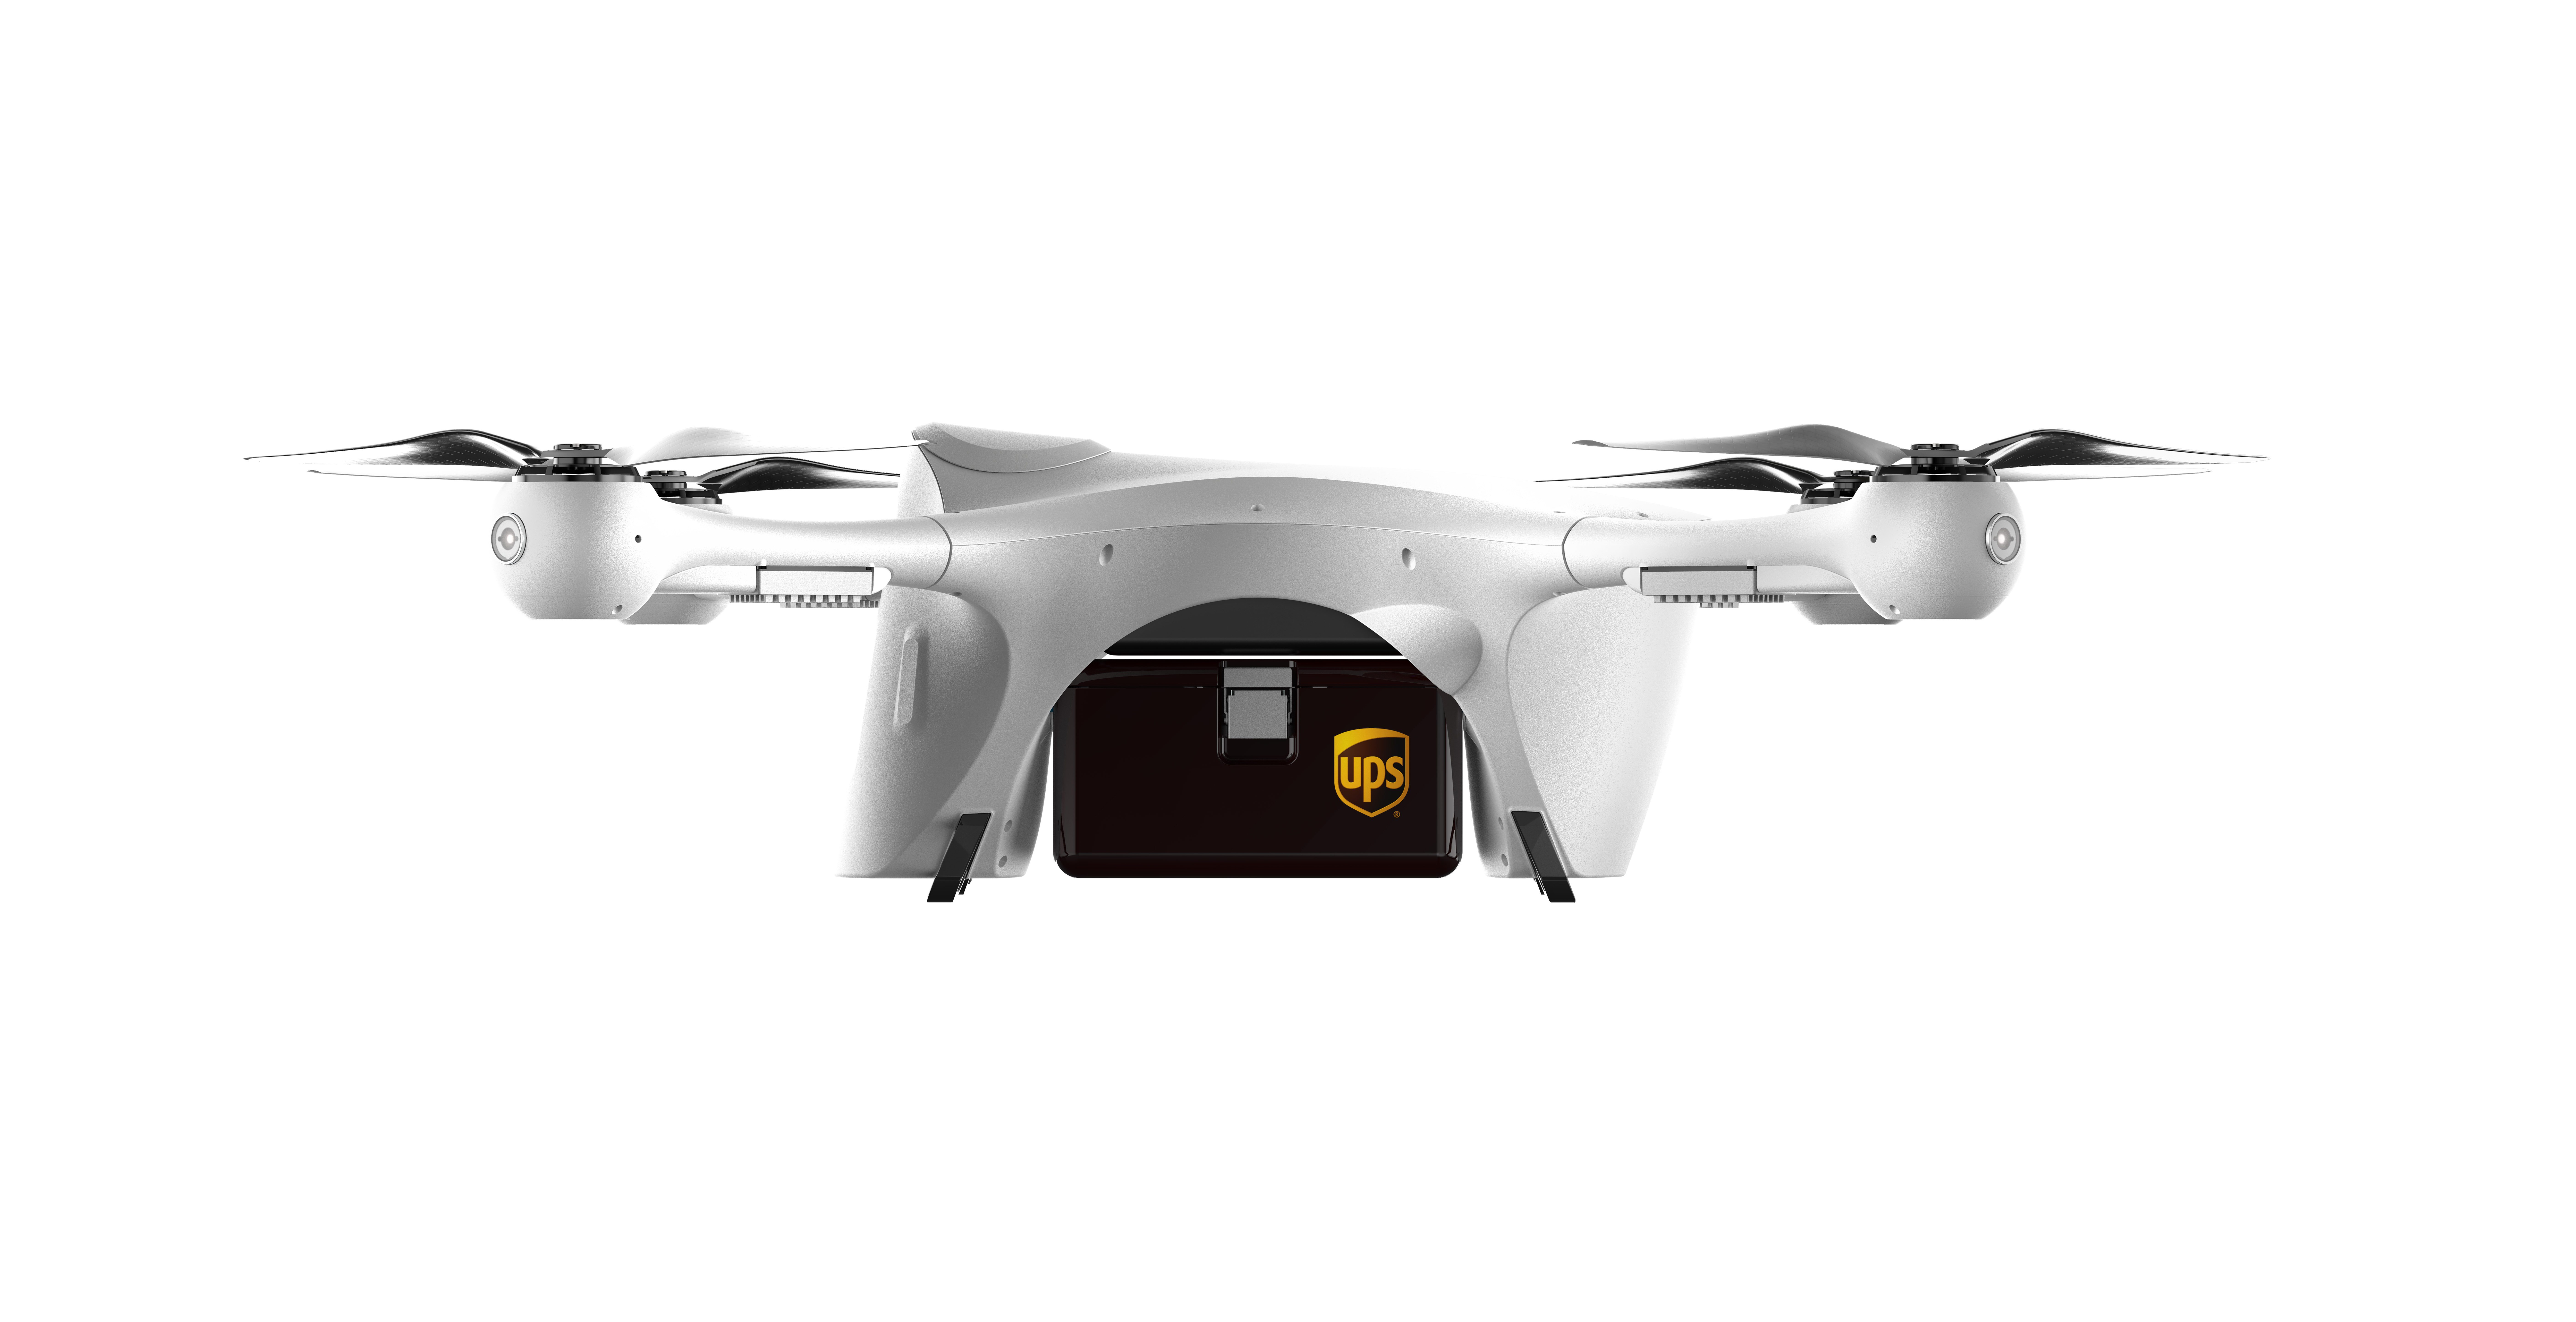 UPS, Henry Schein Testing Medical-Supply Drone Deliveries